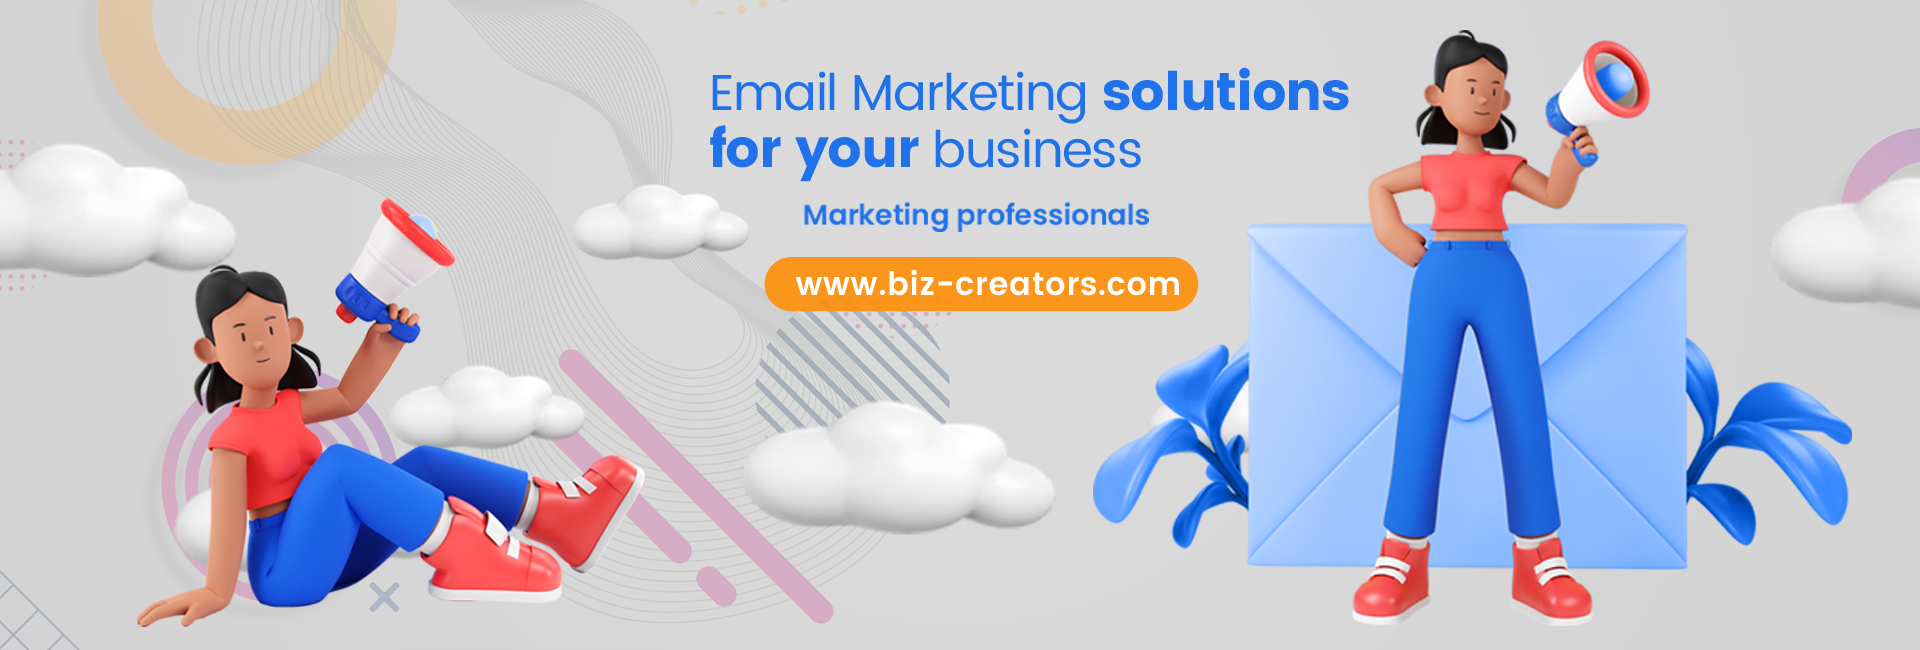 Email Marketing Solutions For Your Business In Sialkot Pakistan